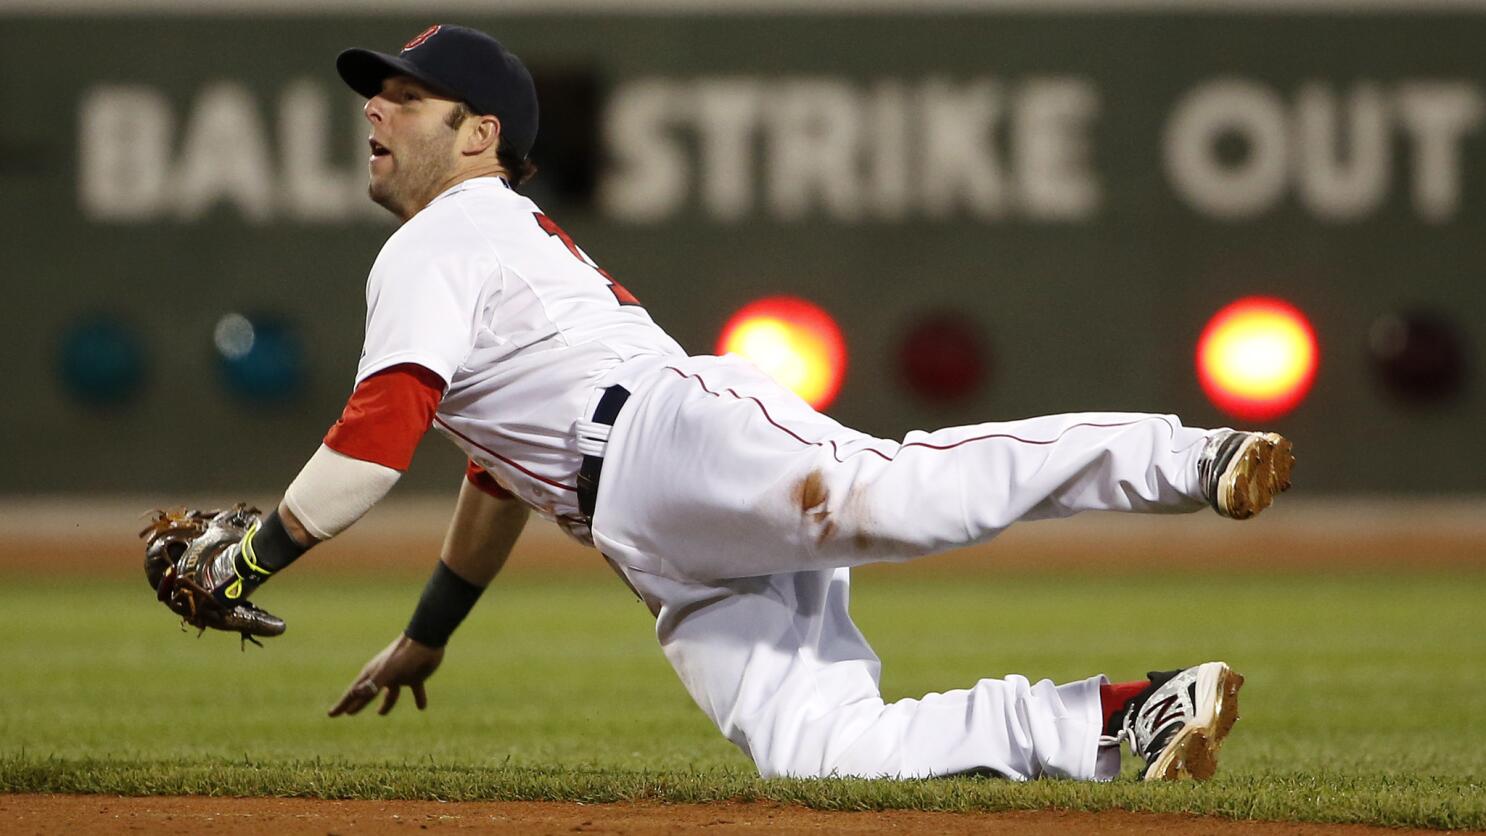 Red Sox's Dustin Pedroia out with hand injury; X-rays are negative